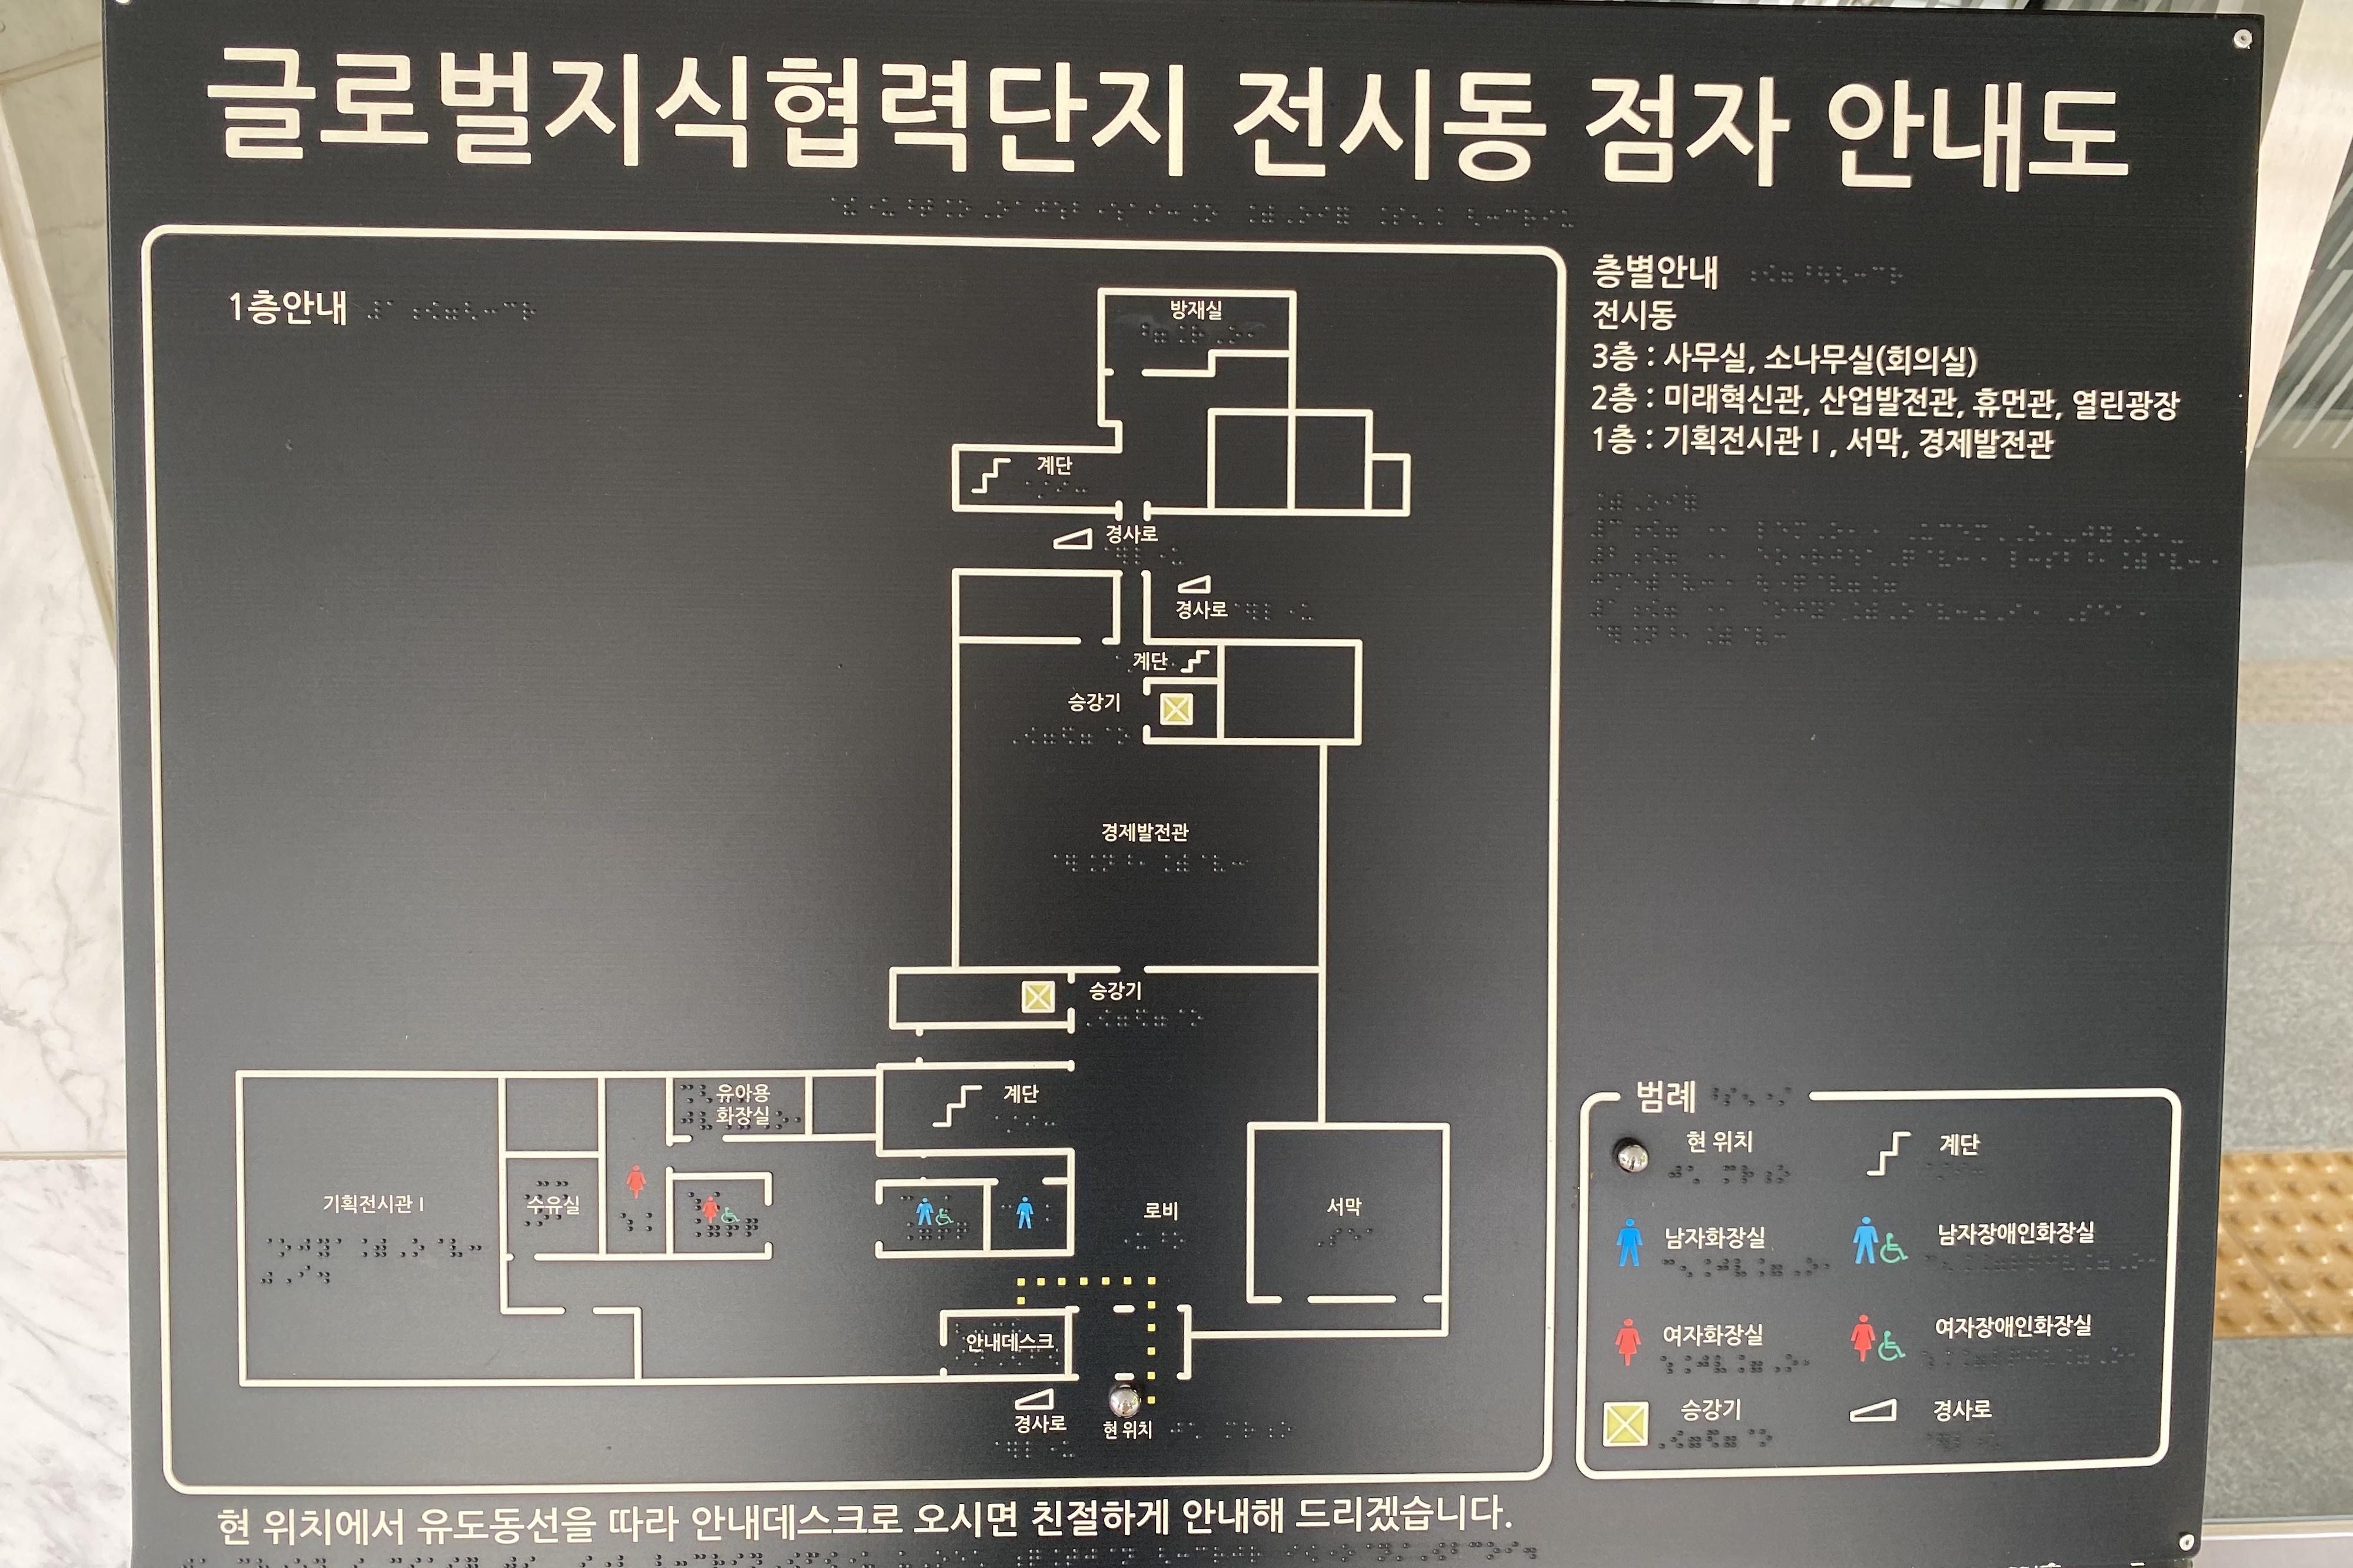 Guide map and information desk0 : Floor map of Block City with Korean braille description